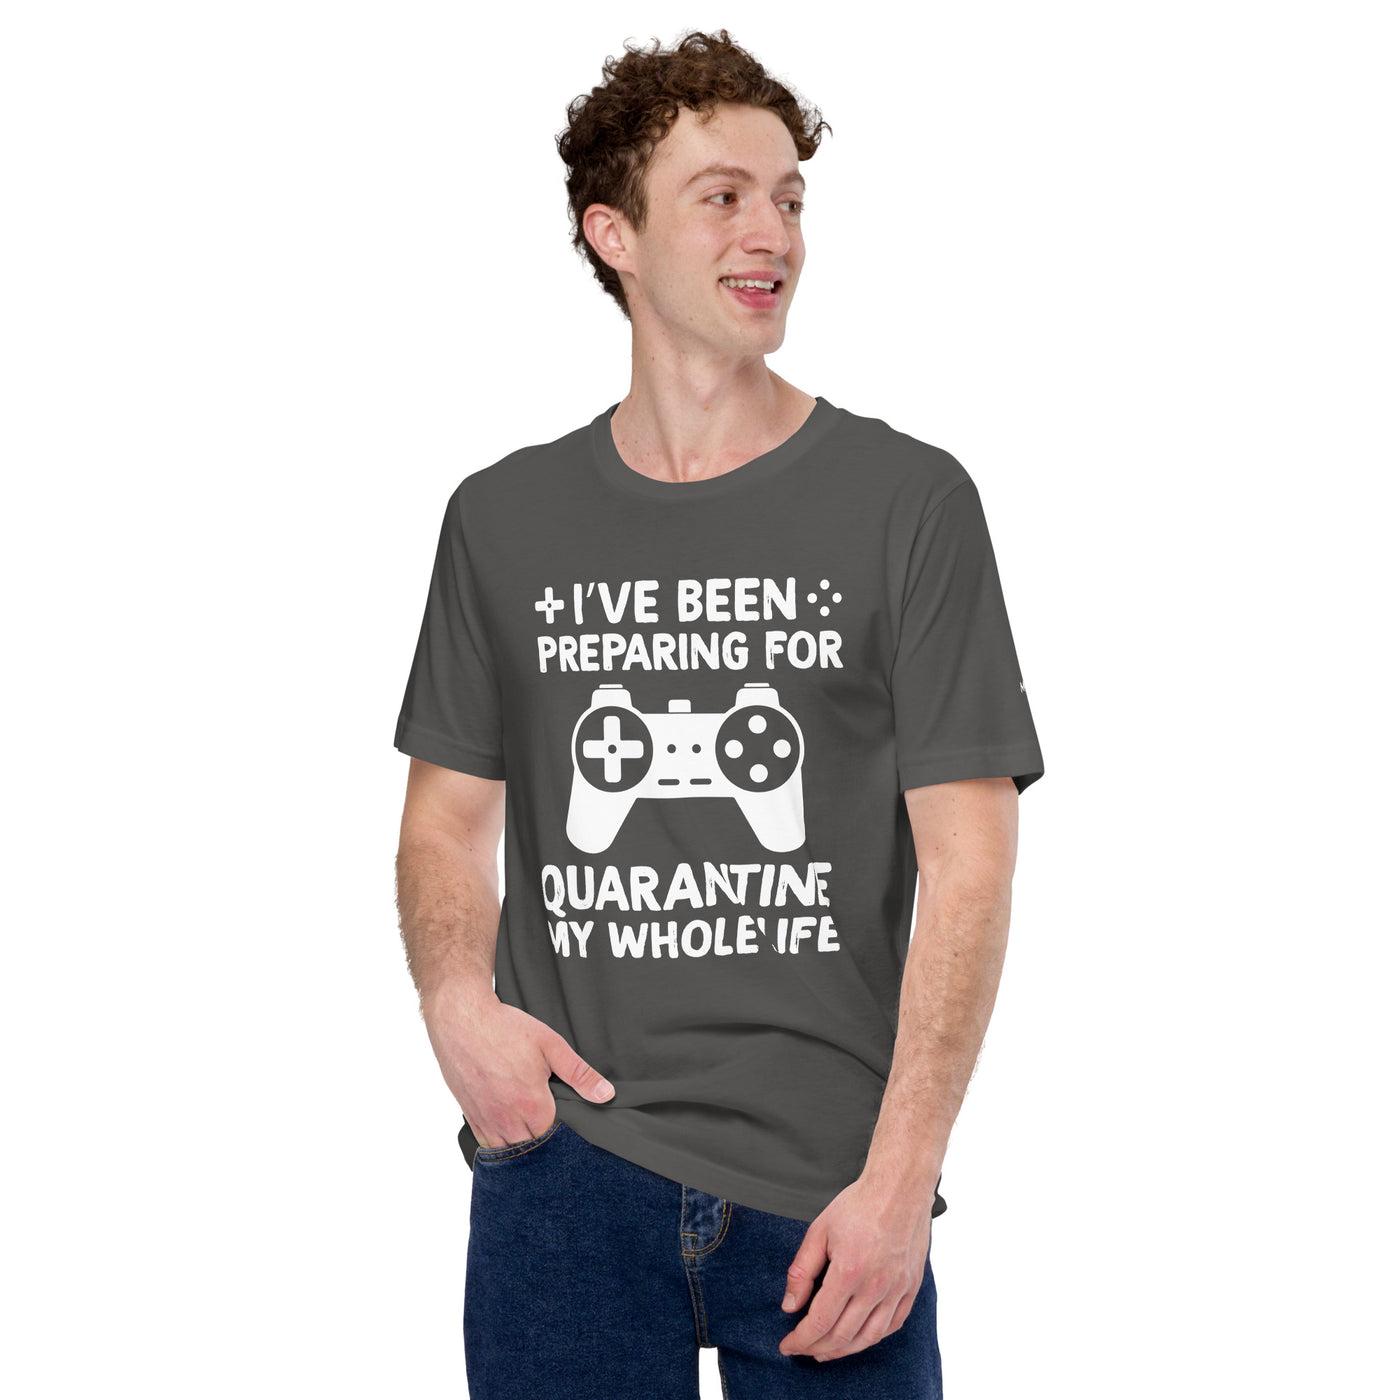 I have been preparing my Quarantine for my whole life - Unisex t-shirt